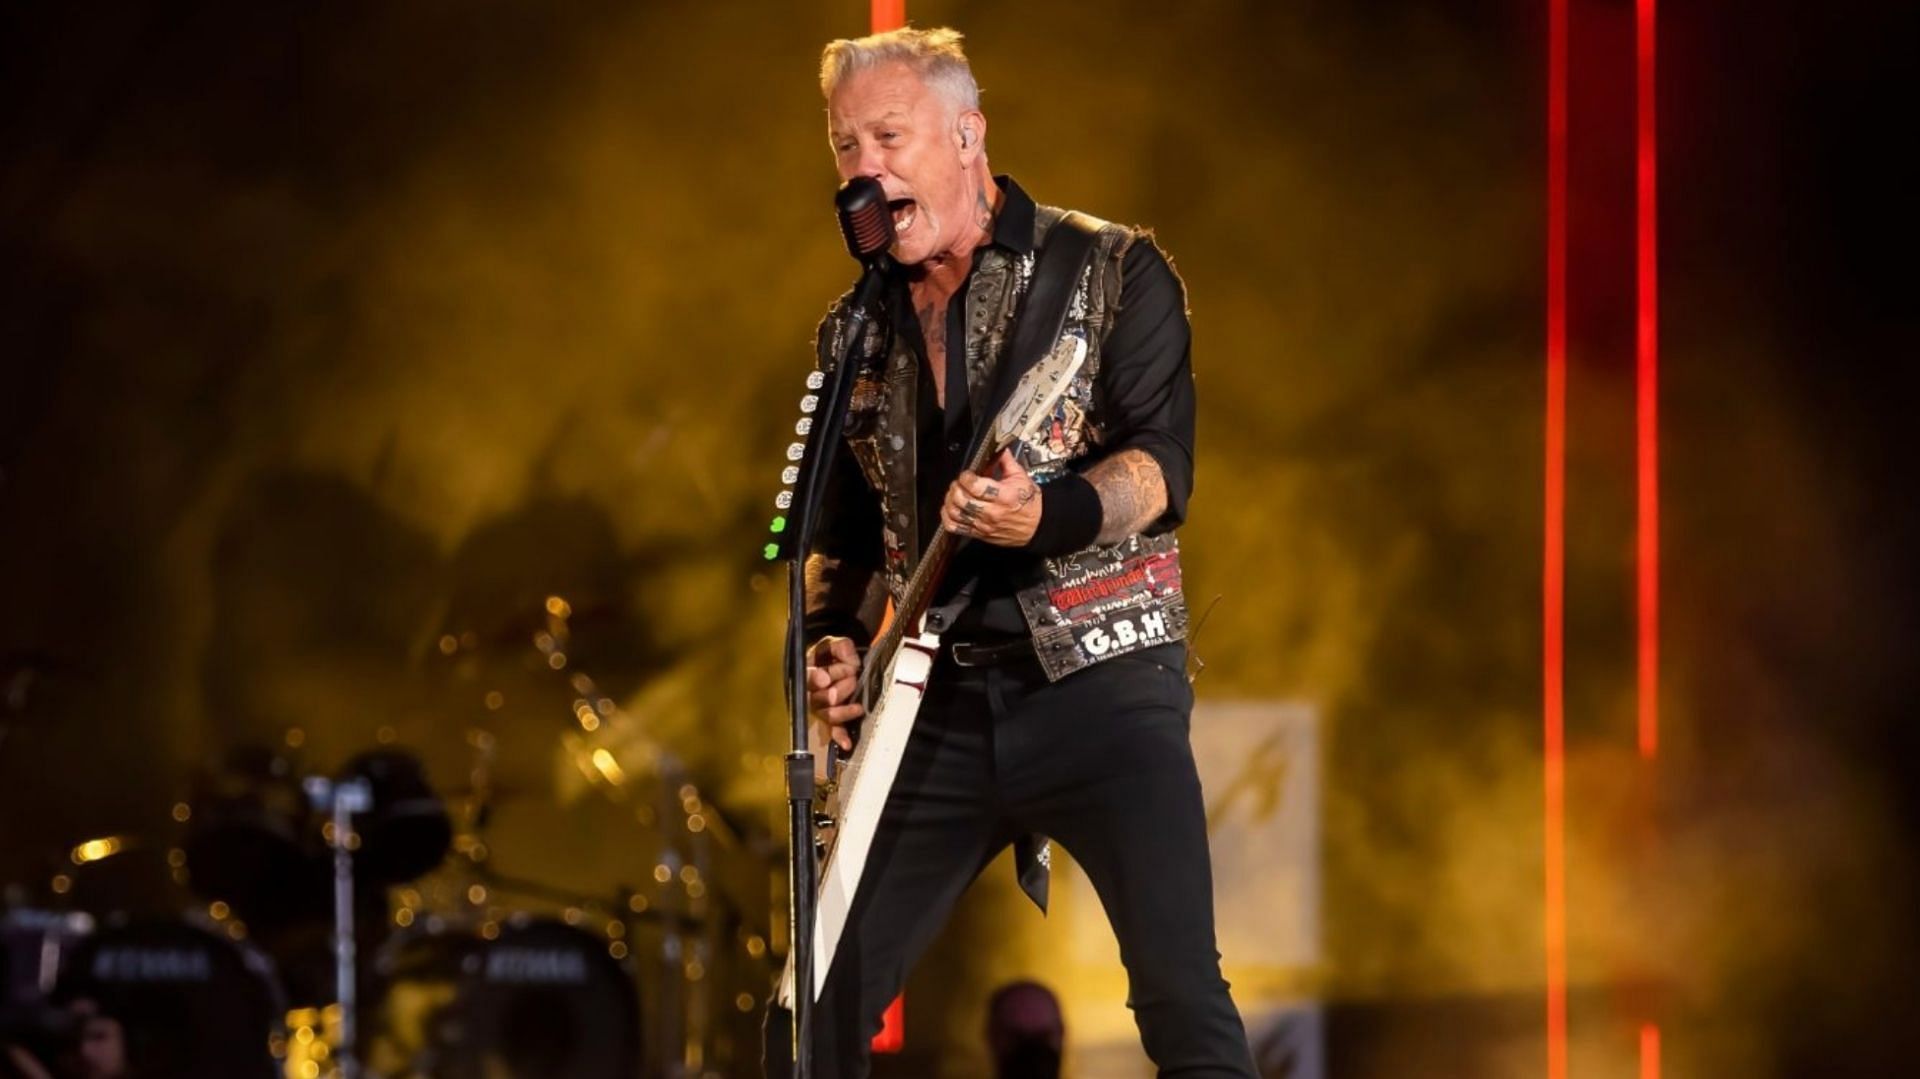 Metallica is among the headliners at the Download Festival 2023. (Image via Getty)